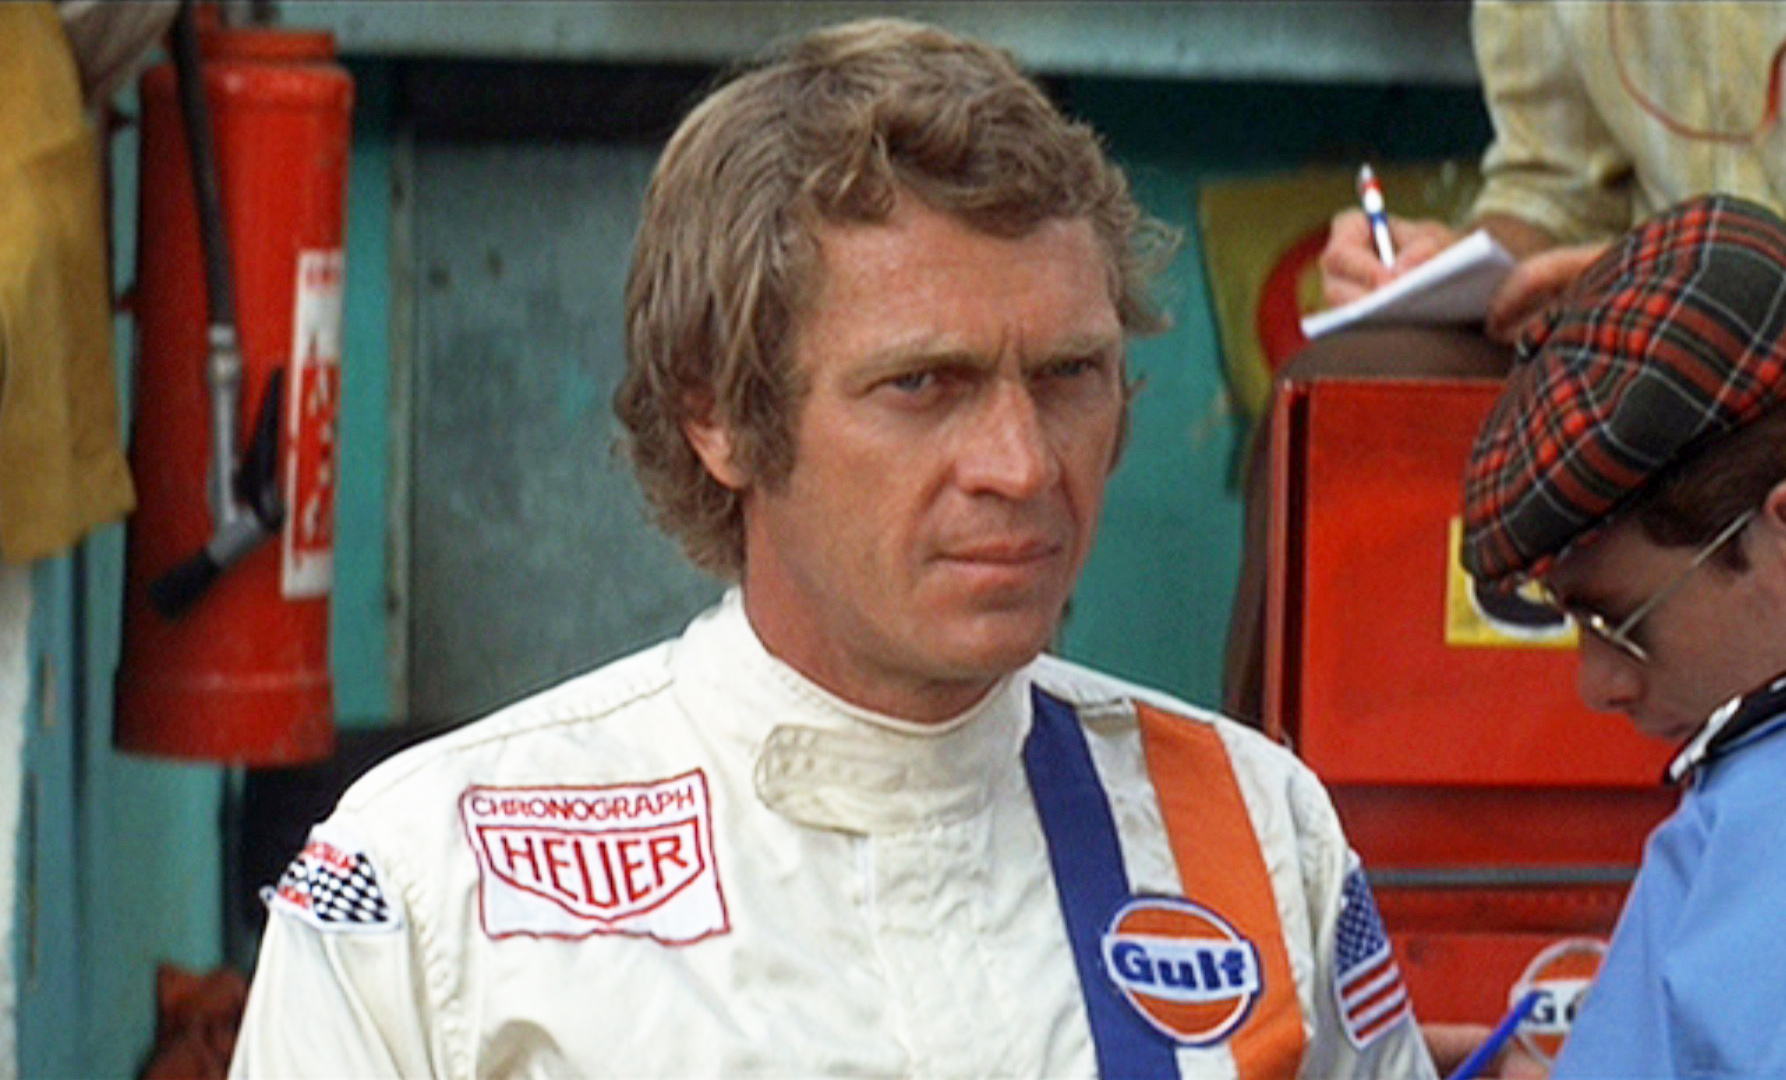 Steve McQueen Movies and How They Made Him the King of Cool | Closer Weekly